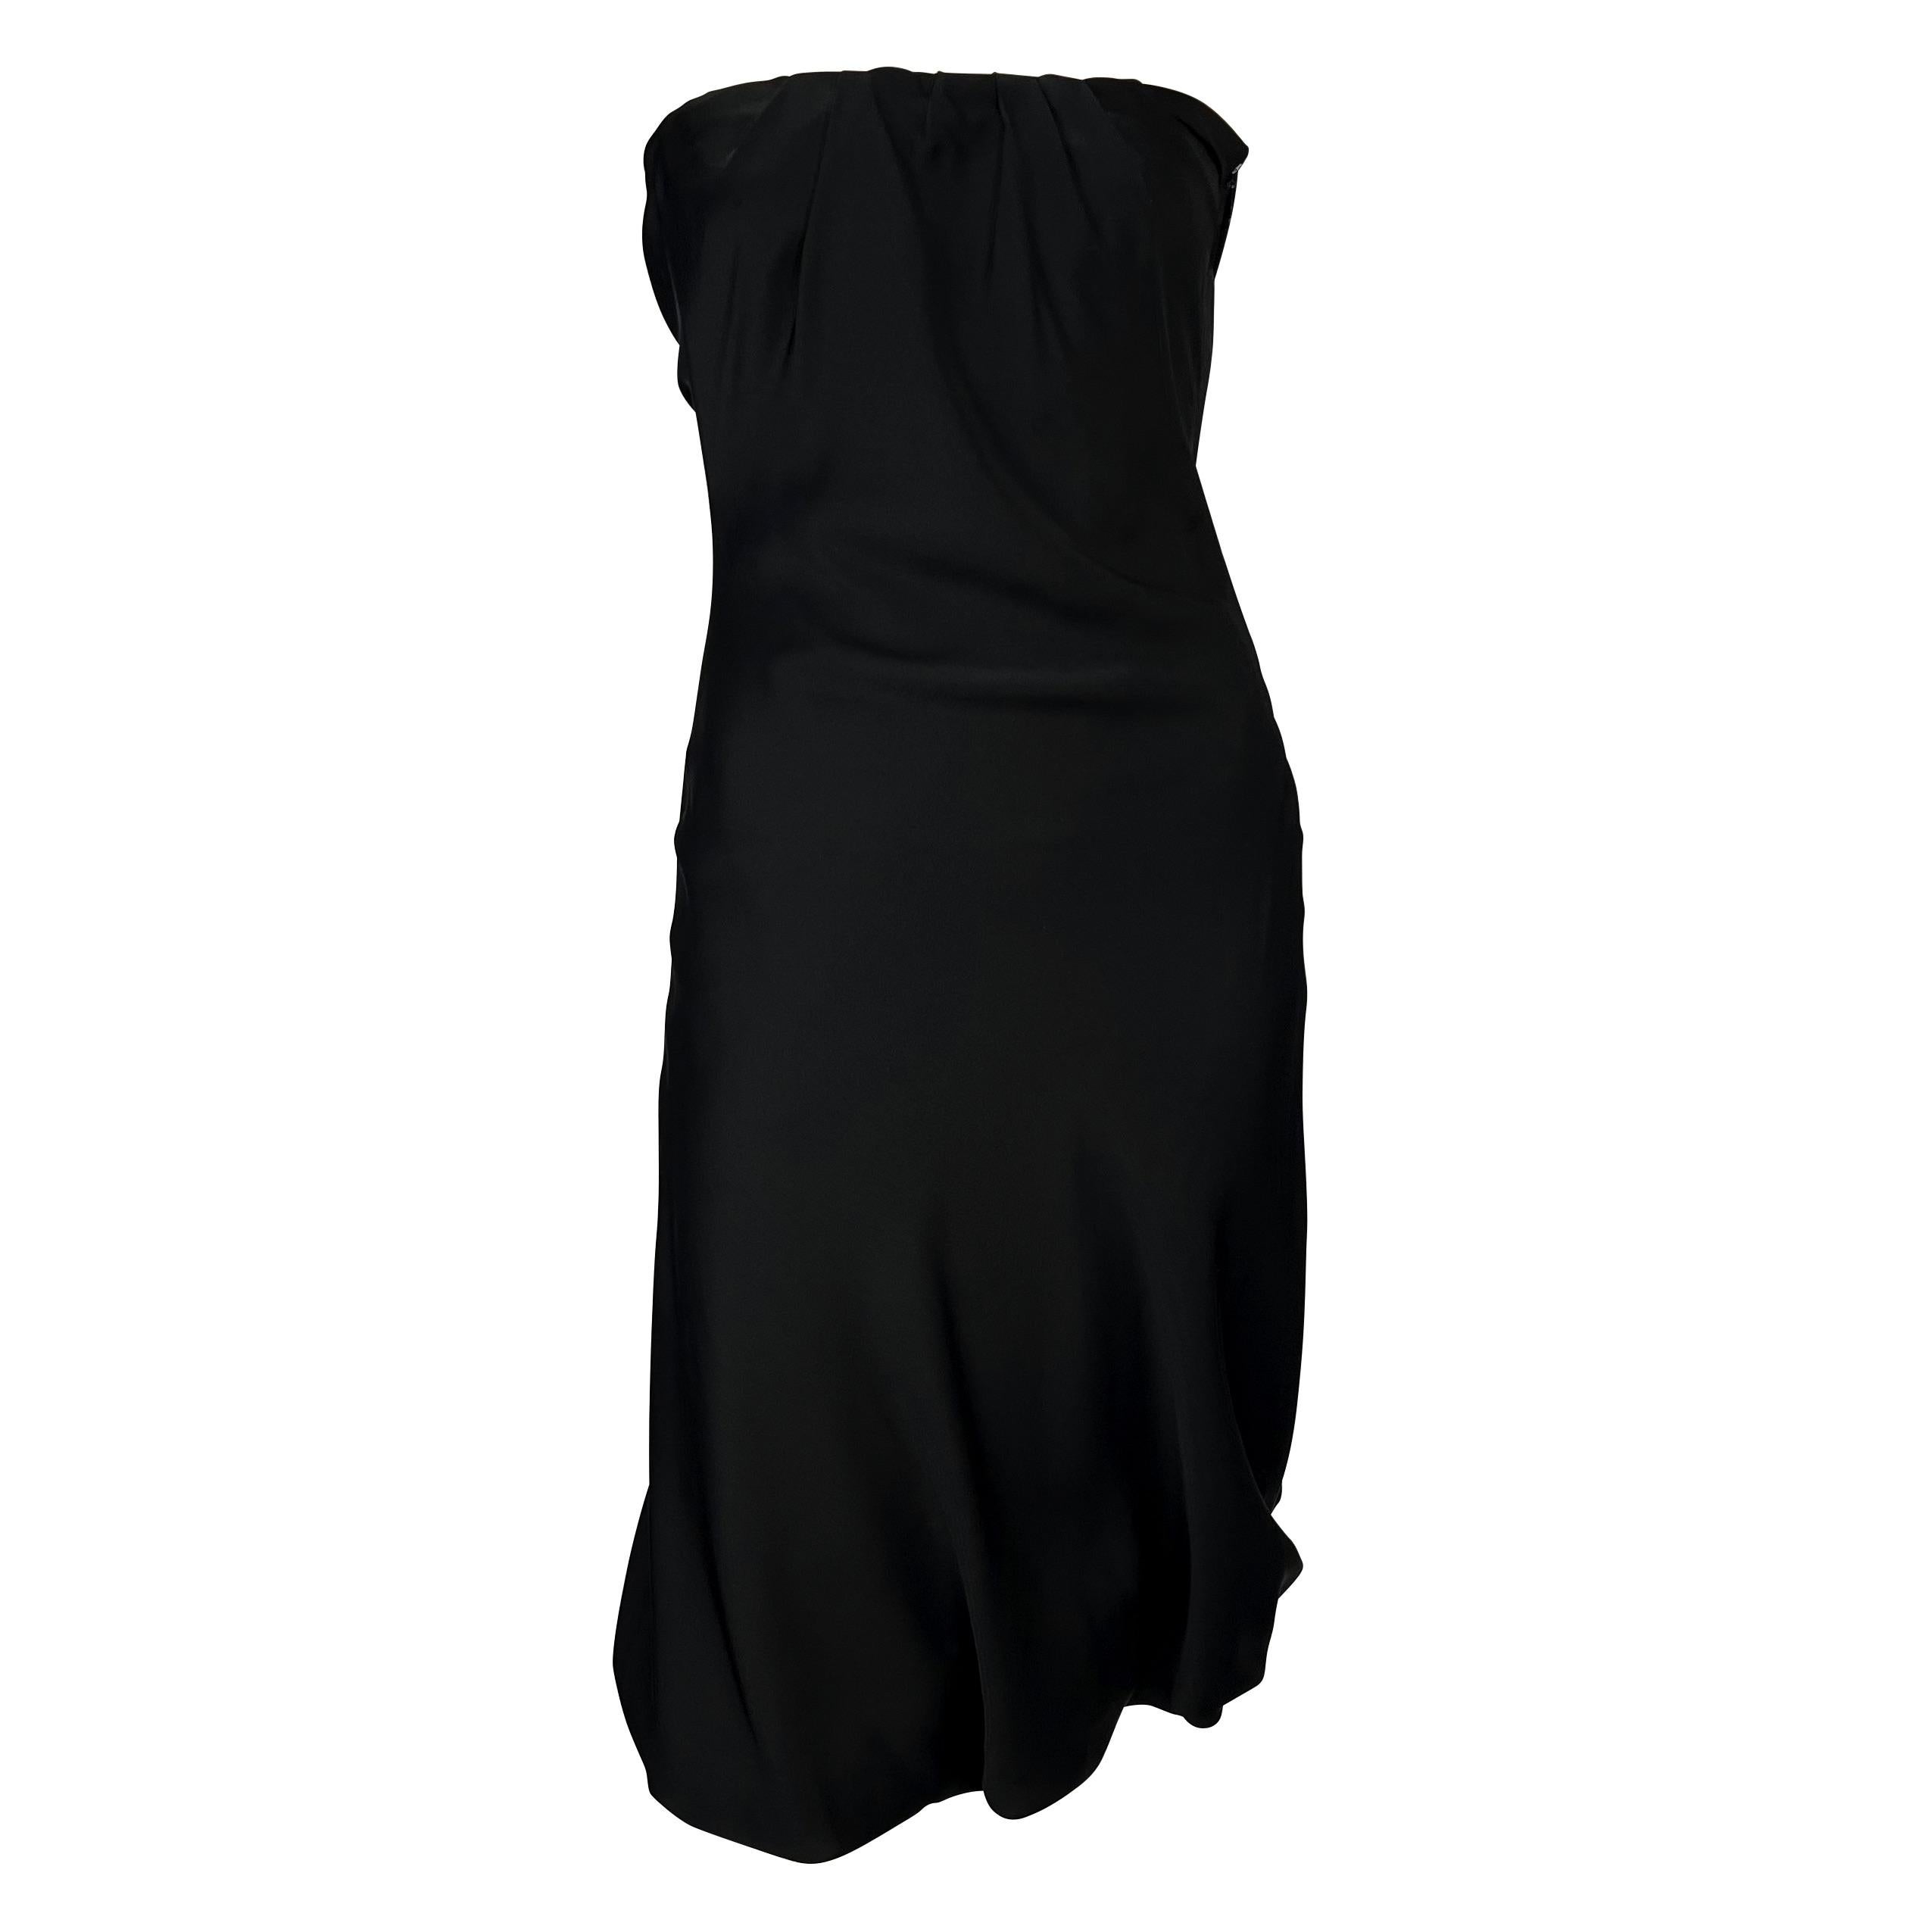 S/S 2001 Gucci by Tom Ford Balloon Mesh Back Black Strapless Dress In Excellent Condition For Sale In West Hollywood, CA